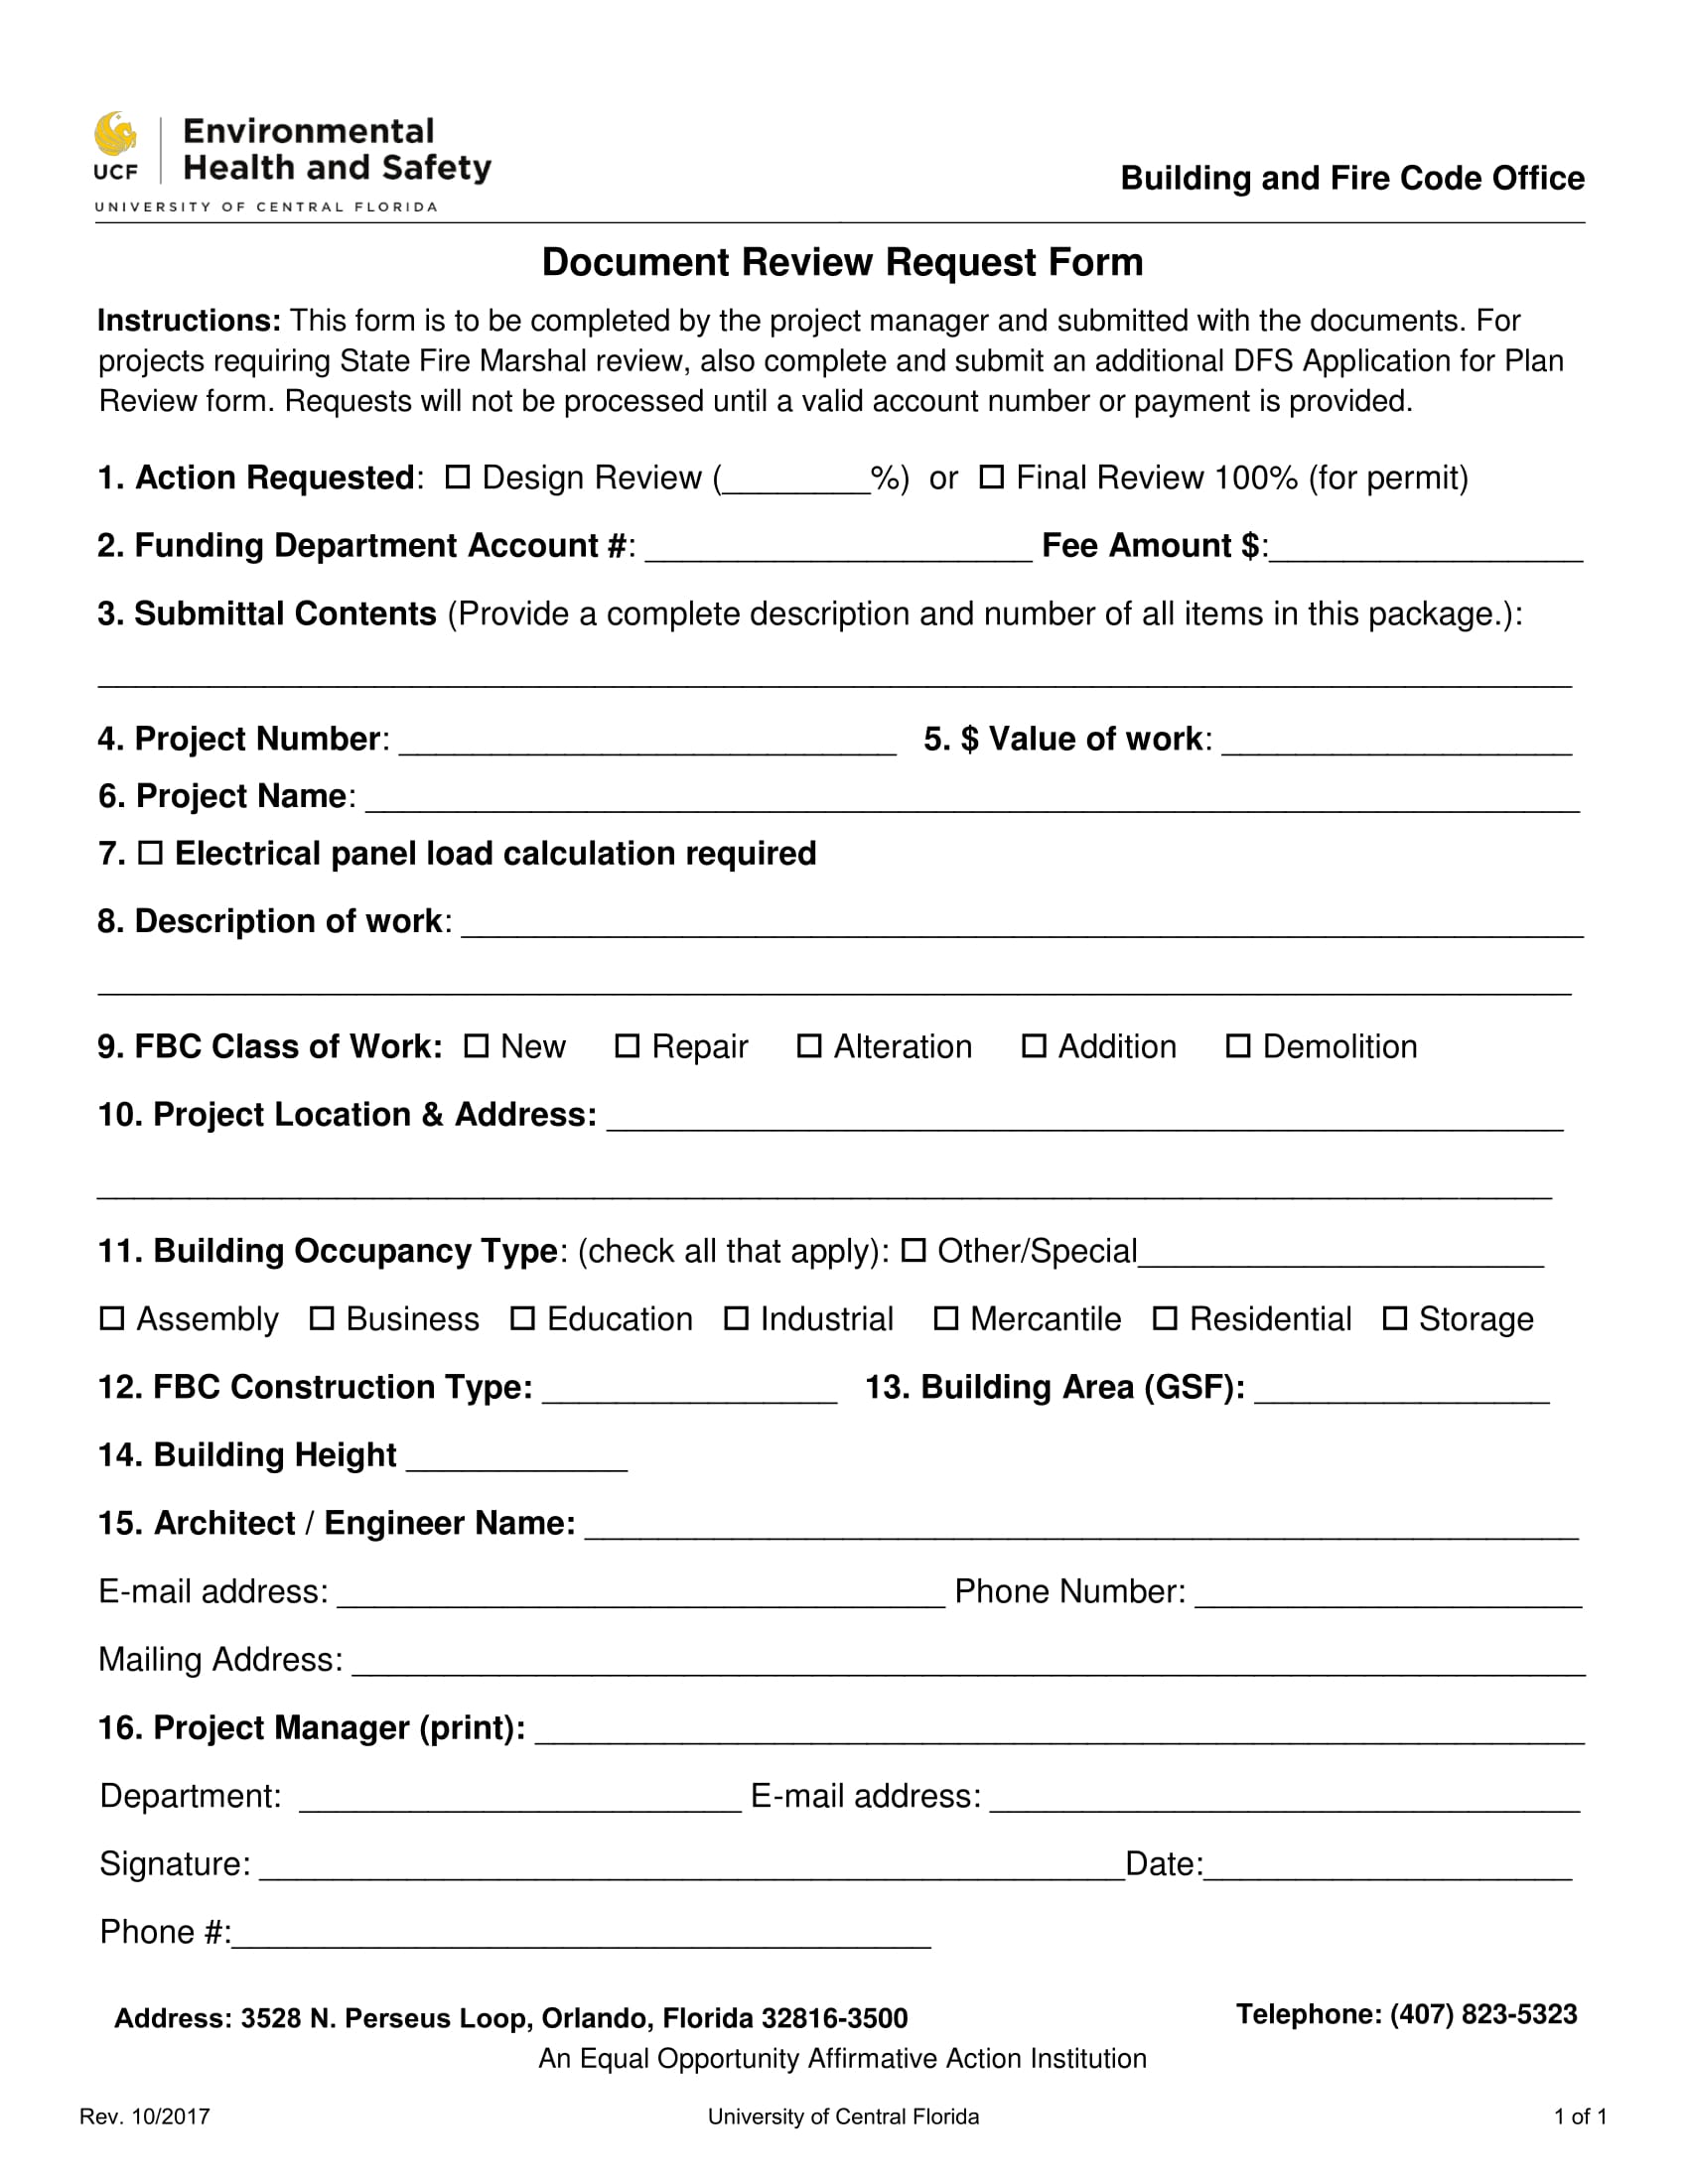 document review request form 1